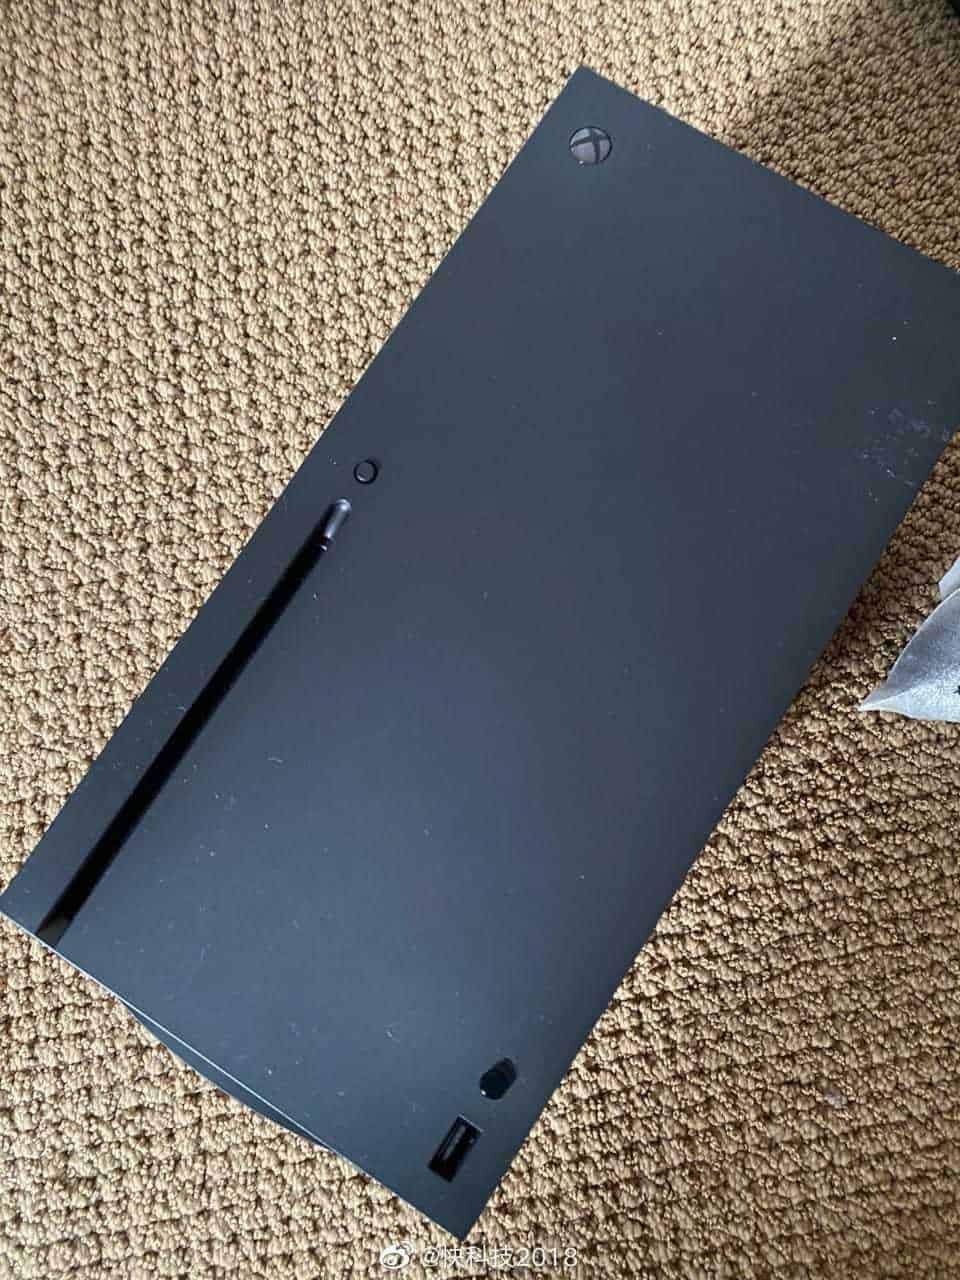 Xbox Series X real photos leaked